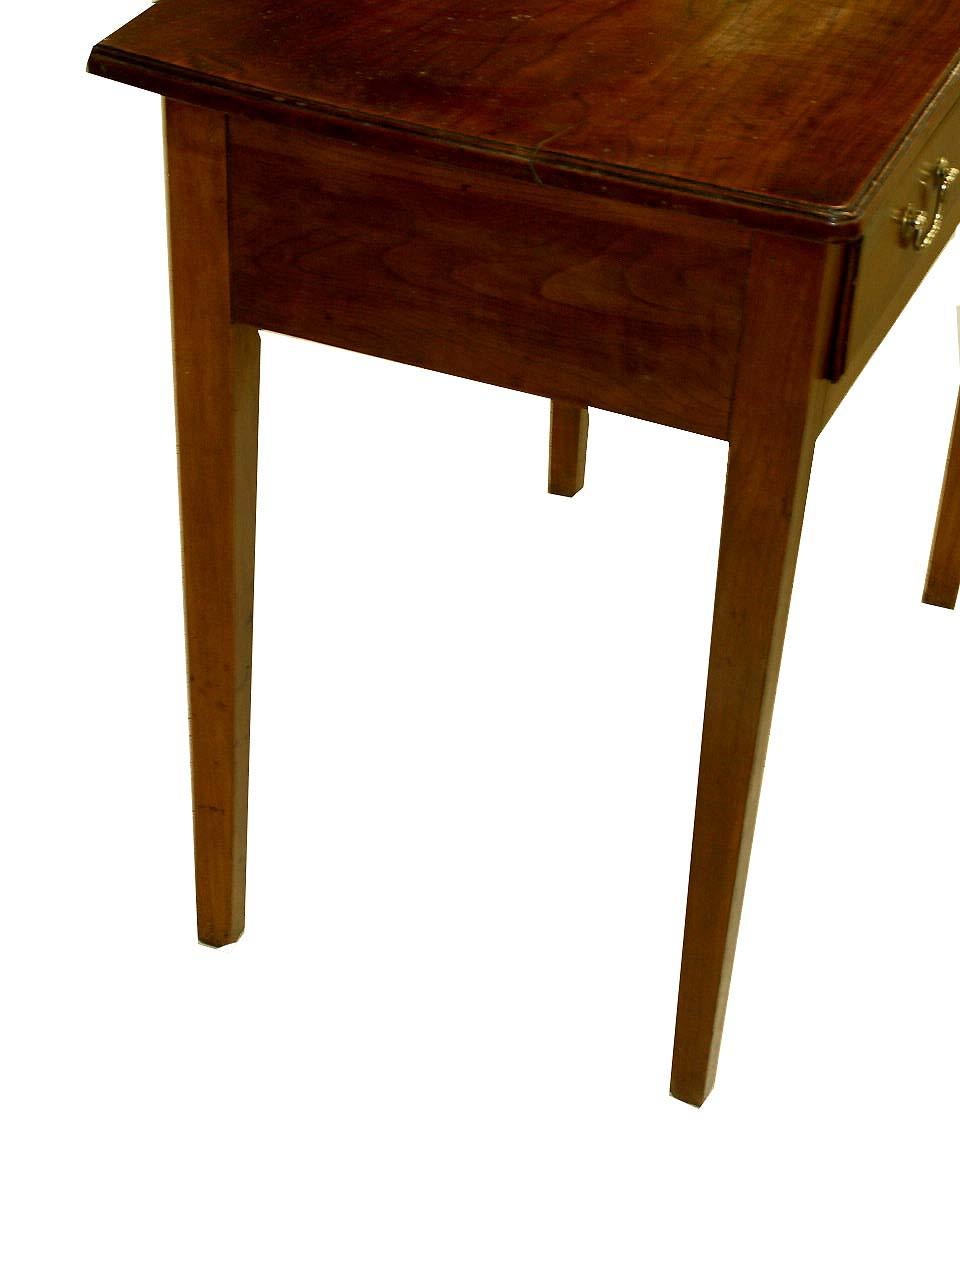 English cherry one drawer table with beautiful figured cherry top, the single drawer with original brass swan neck pulls, tapered legs.